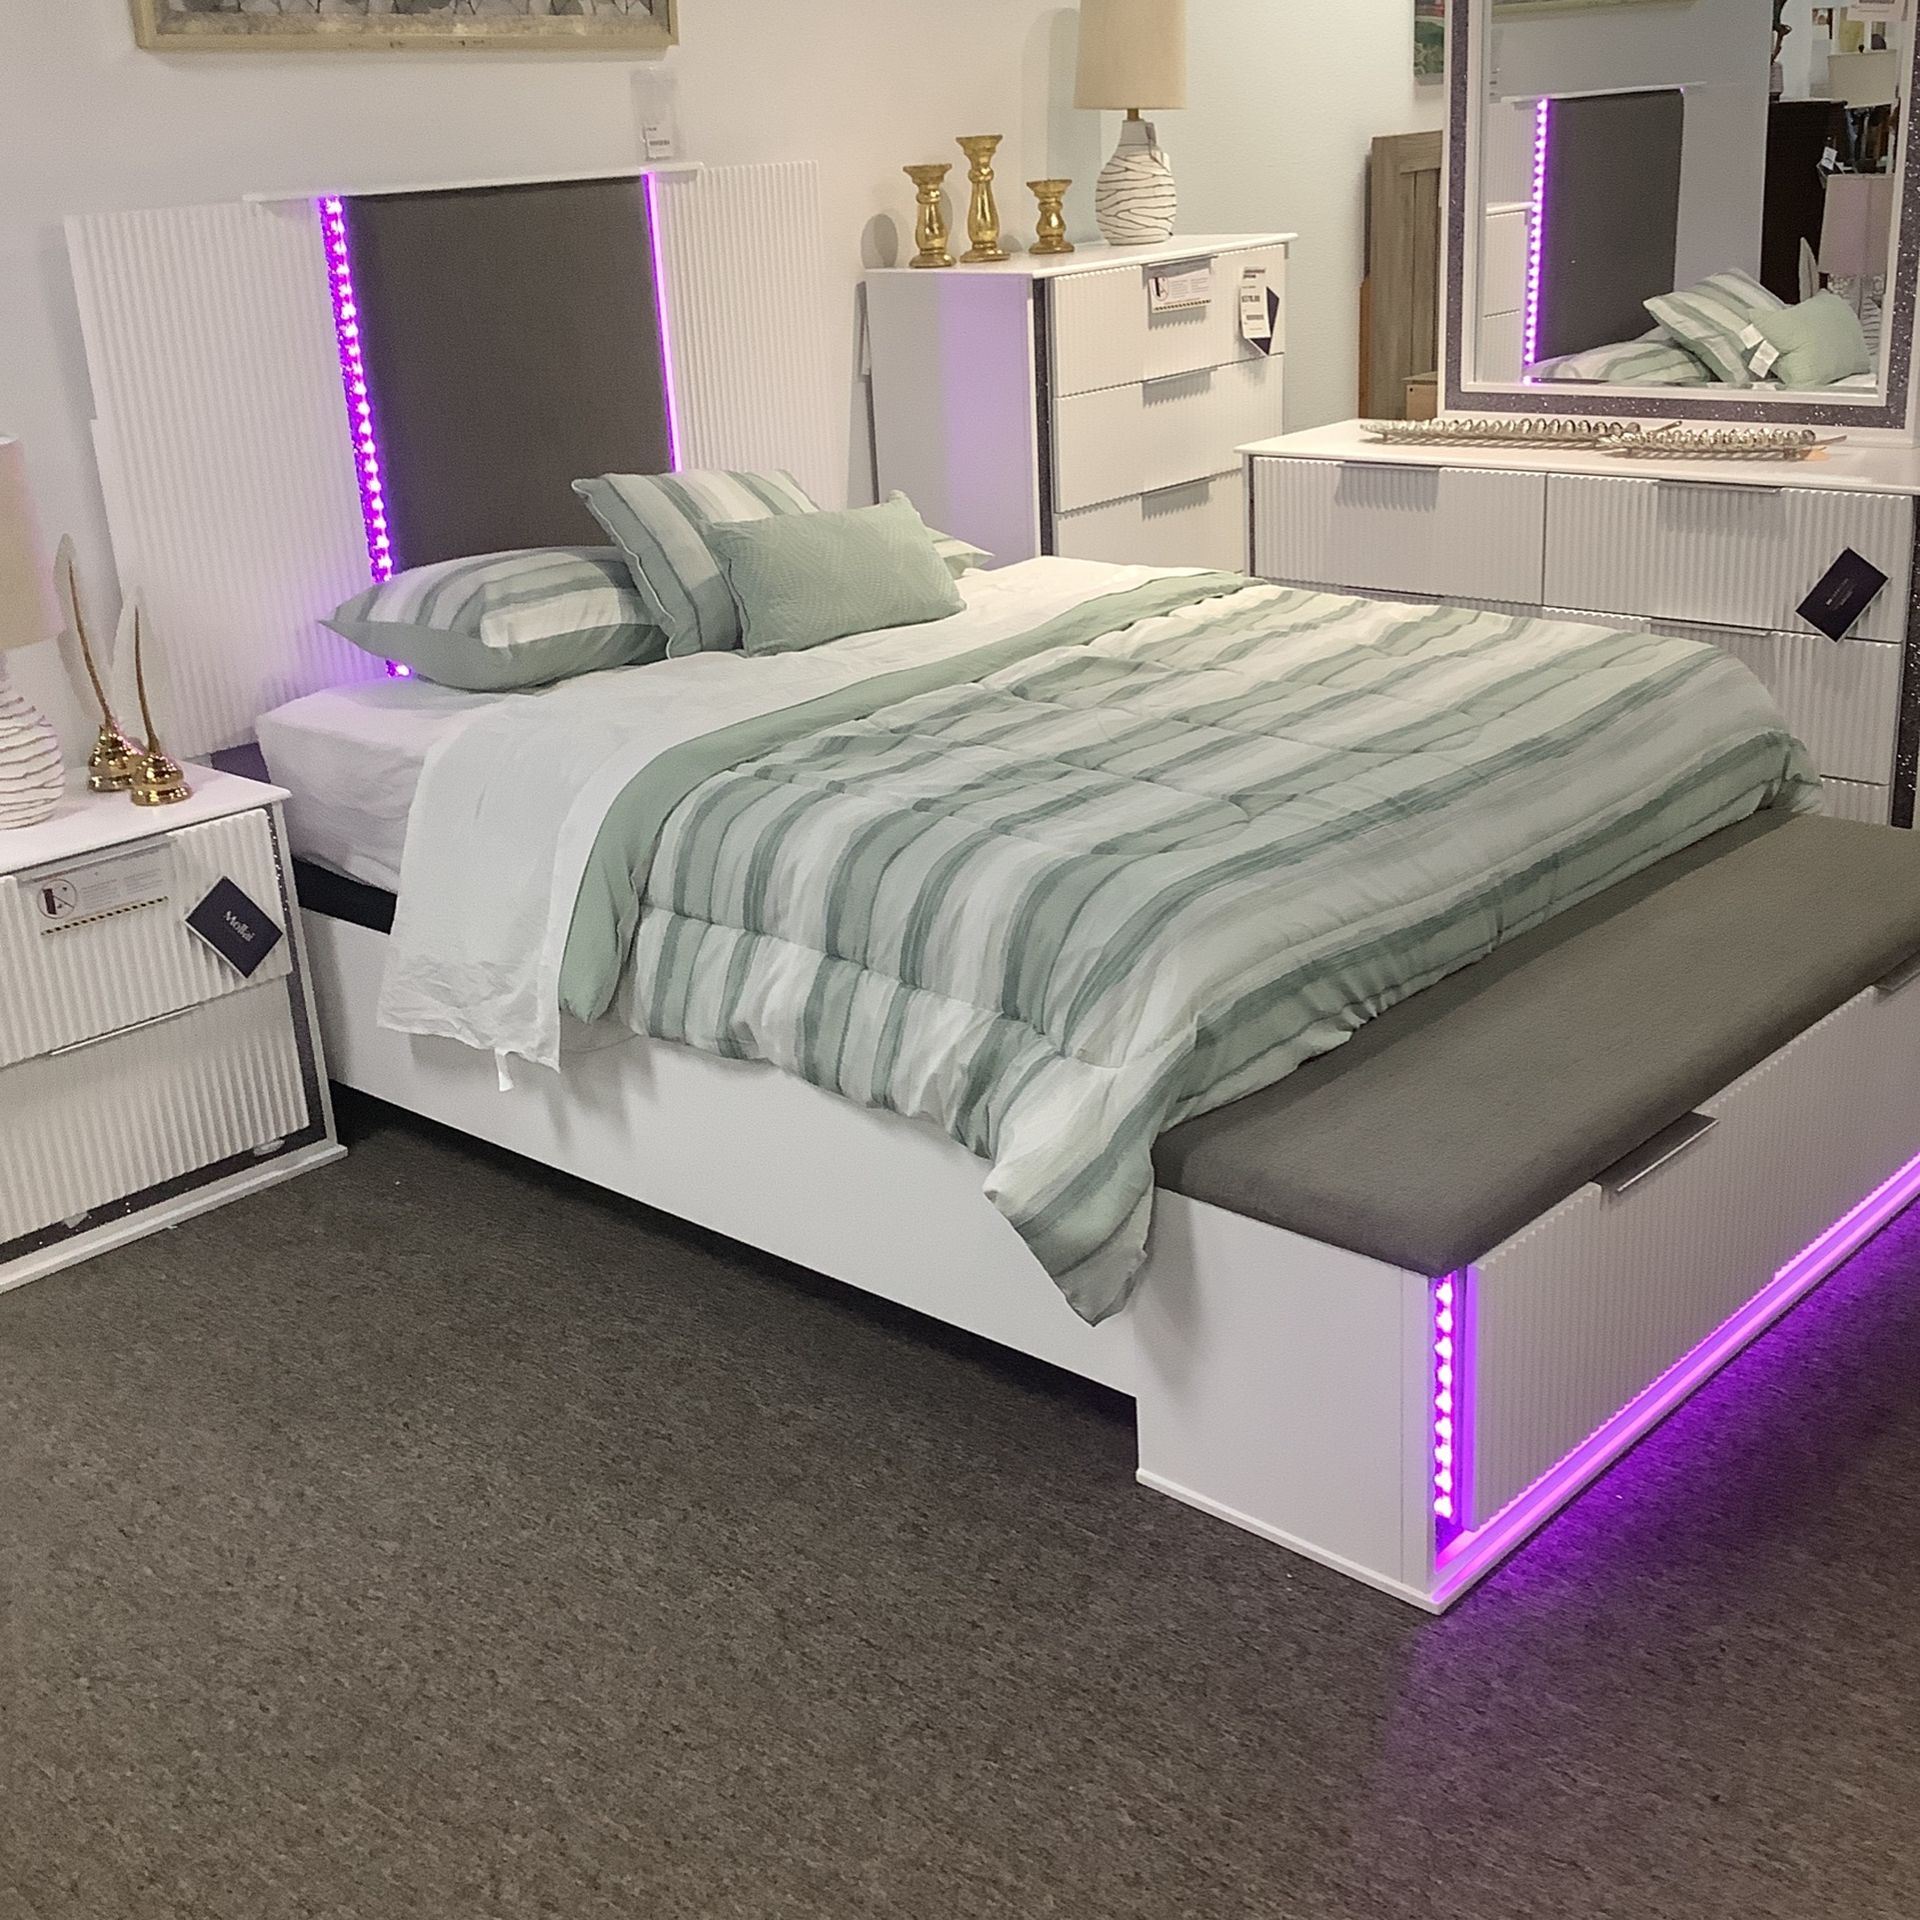 Six Piece Bedroom Set Led King Or Queen